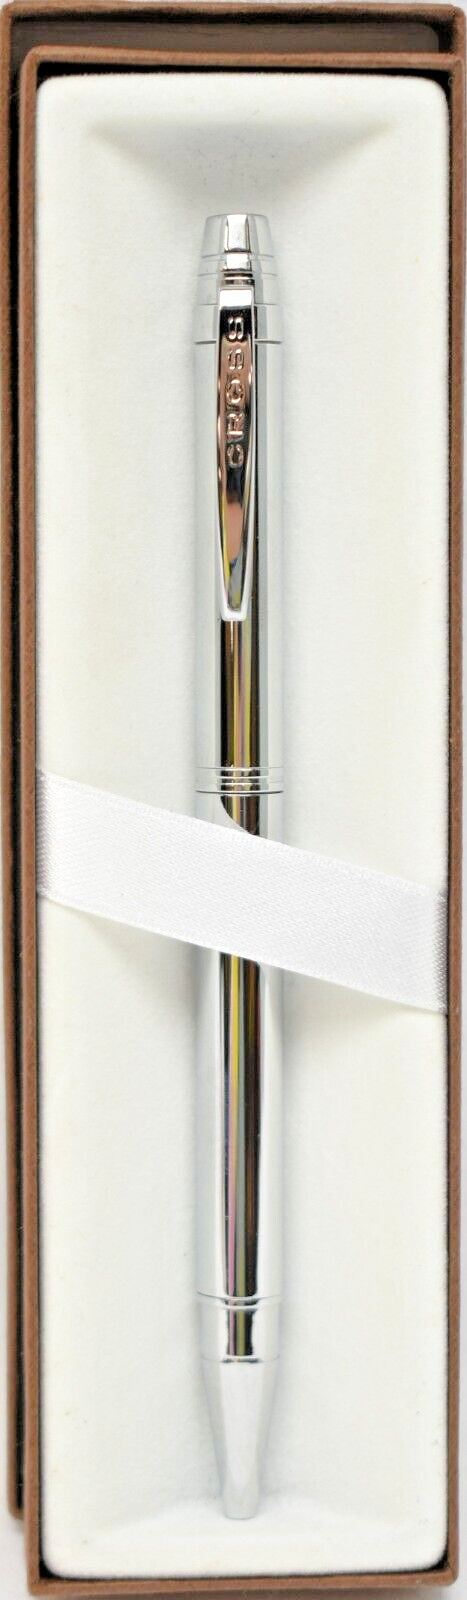 CROSS Helios Polished Chrome Ballpoint Pen with Gift Box - Black Ink